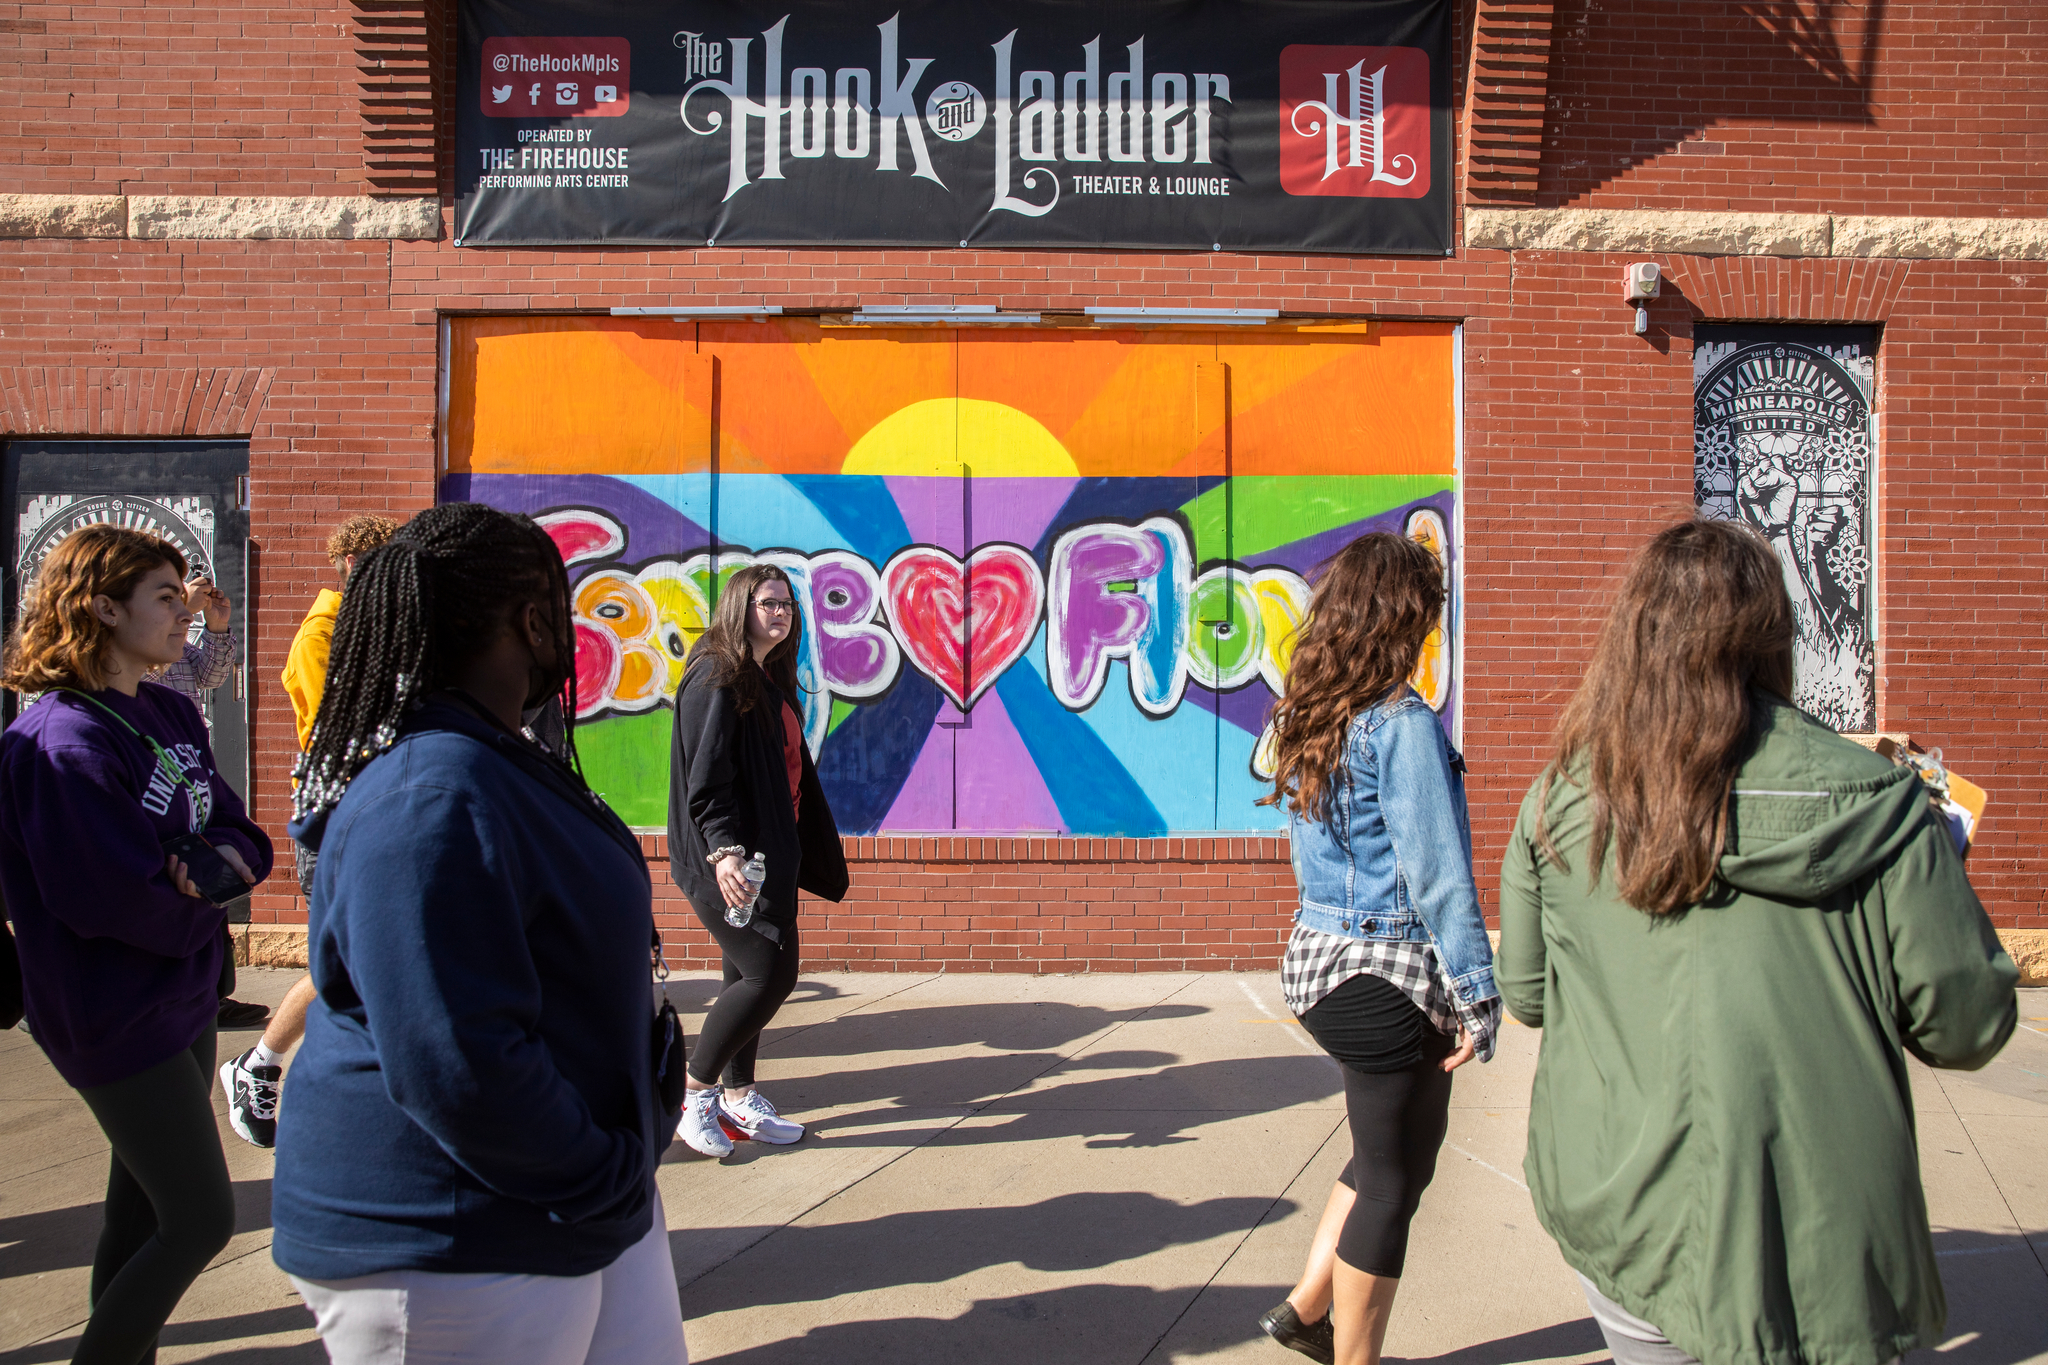 Students visit the site of the Minneapolis Police 3rd Precinct and surrounding area to observe and discuss the street art that has been made since the destructive protests that occurred there in May of 2020 following the murder of George Floyd